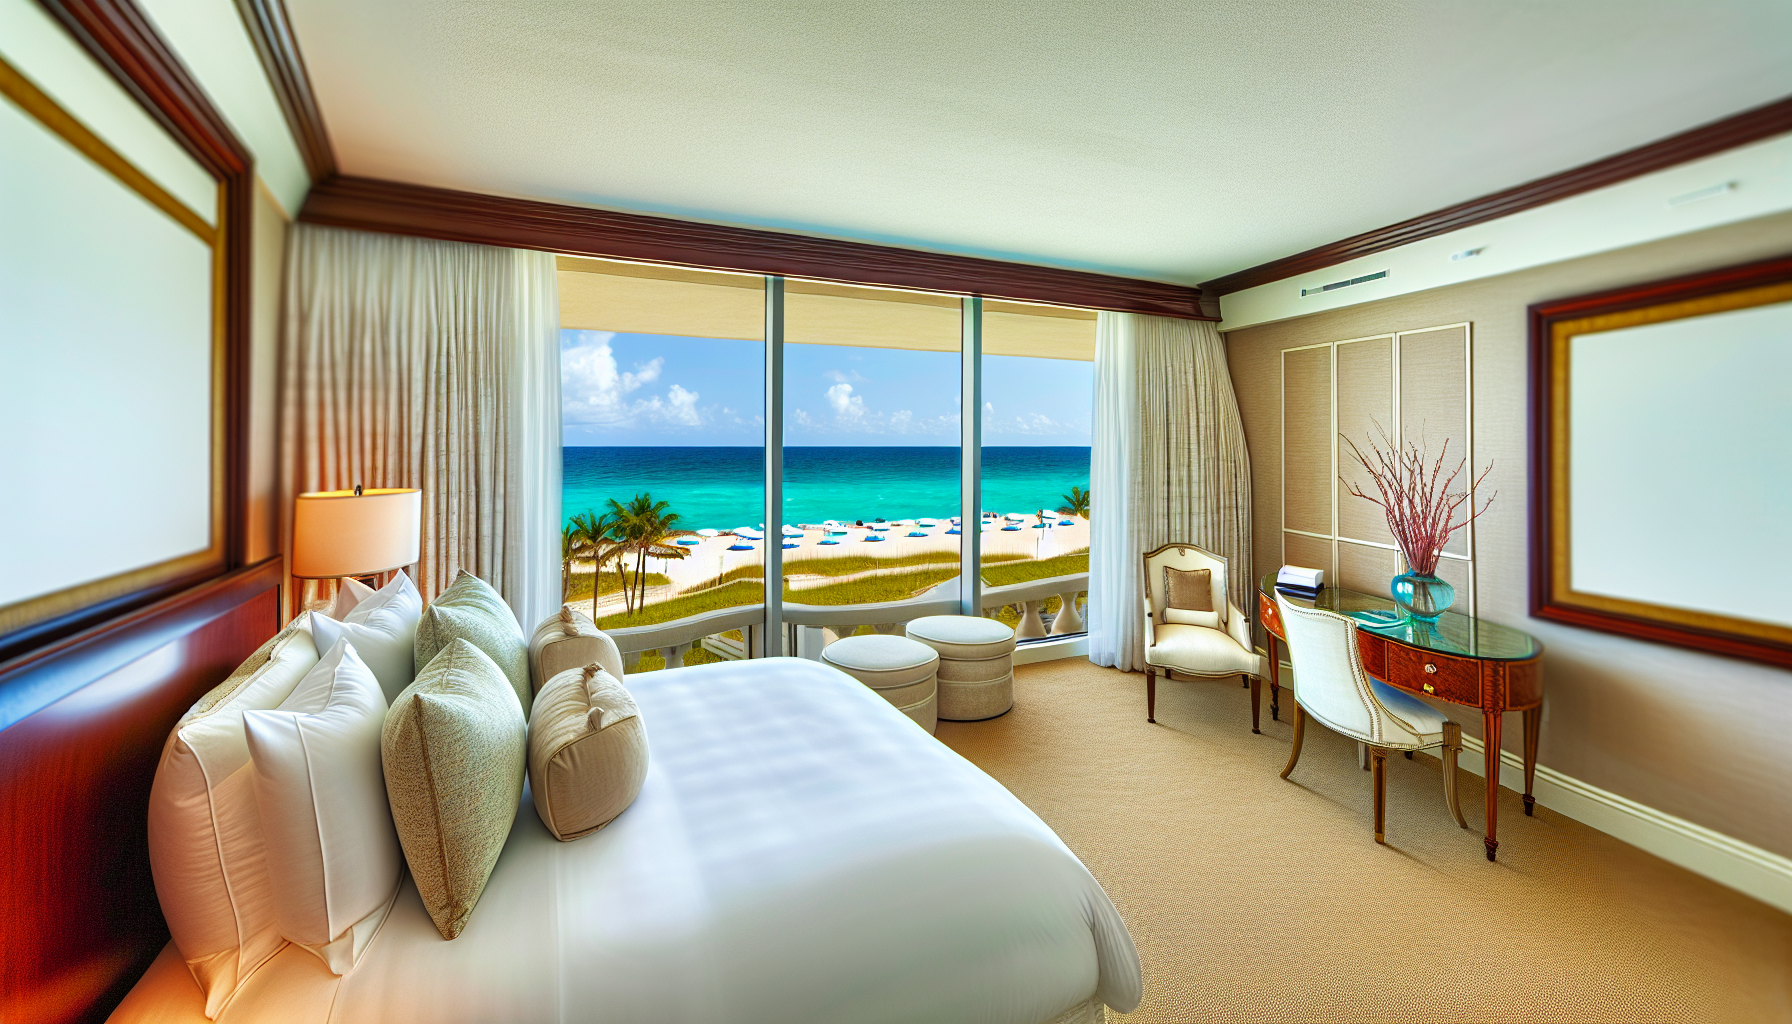 Luxurious room with oceanfront view at Ritz Carlton Fort Lauderdale